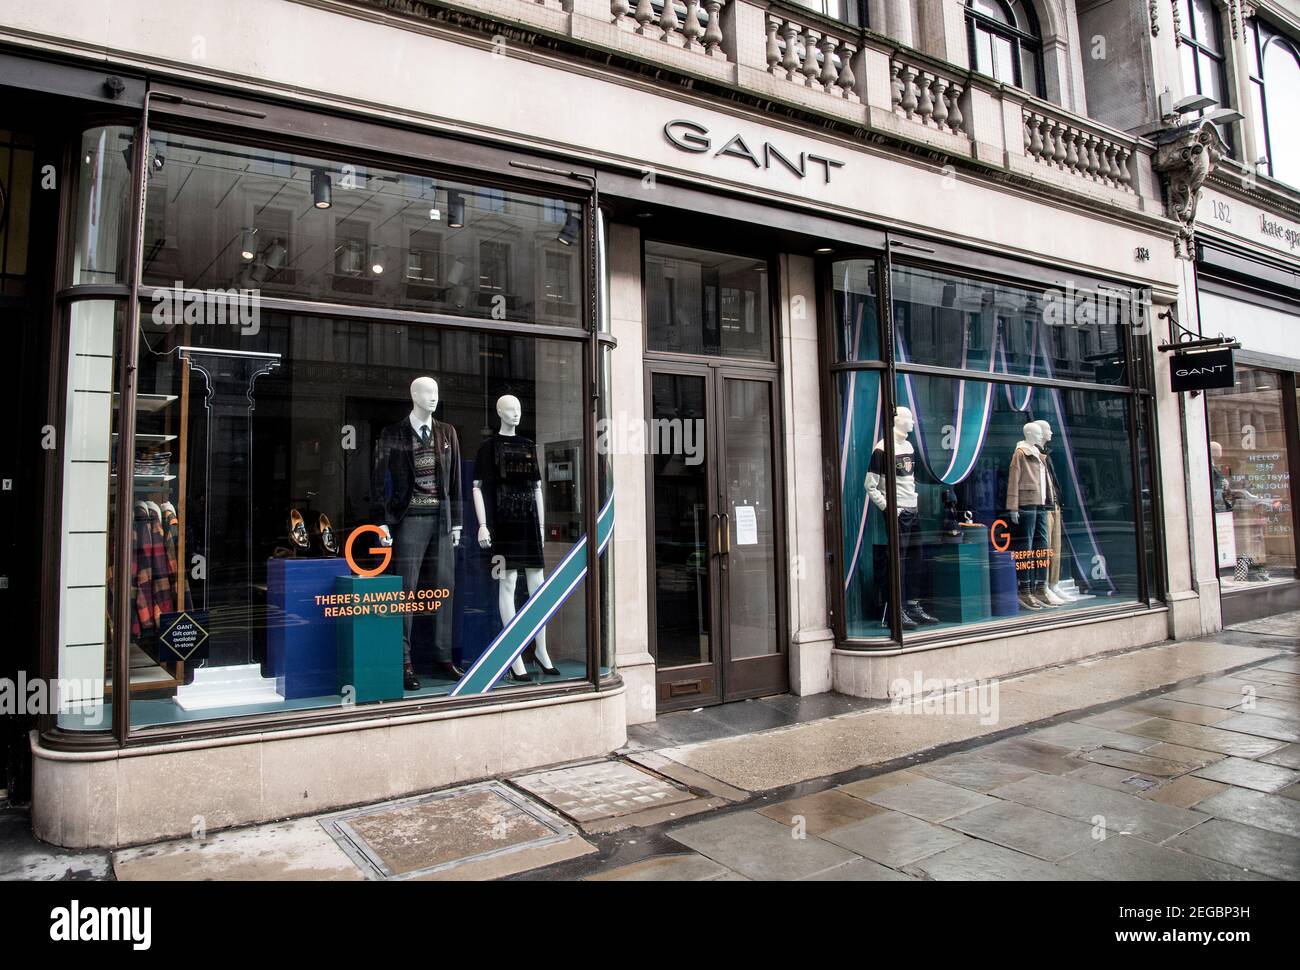 General View of a Gant store in London Stock Photo - Alamy